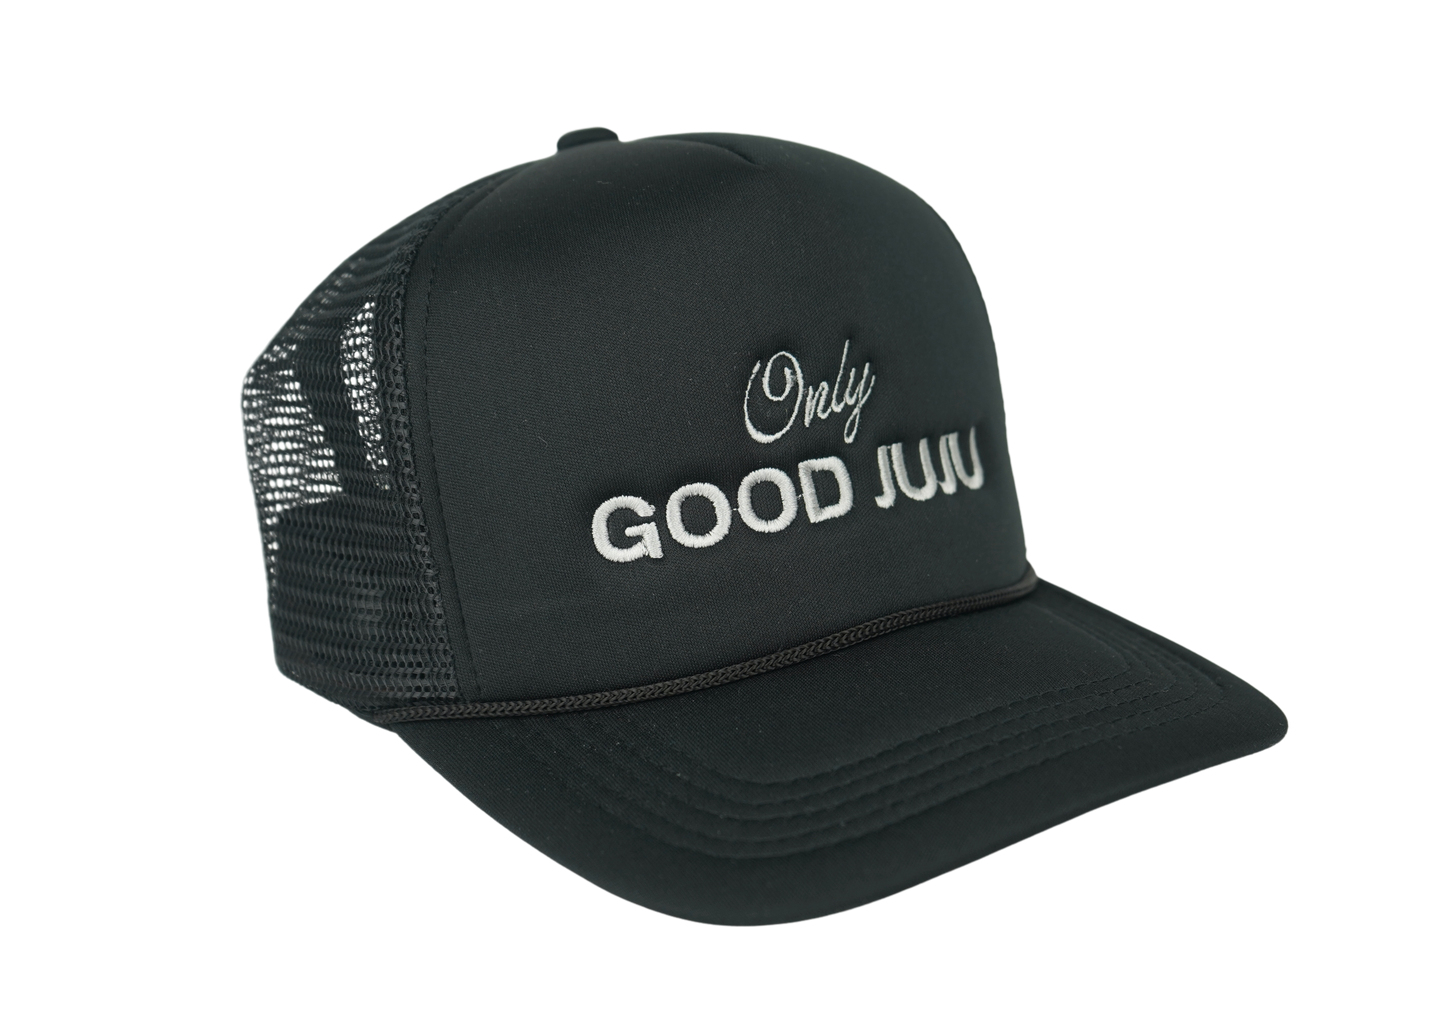 Only Good JuJu Embroidered Trucker Hat